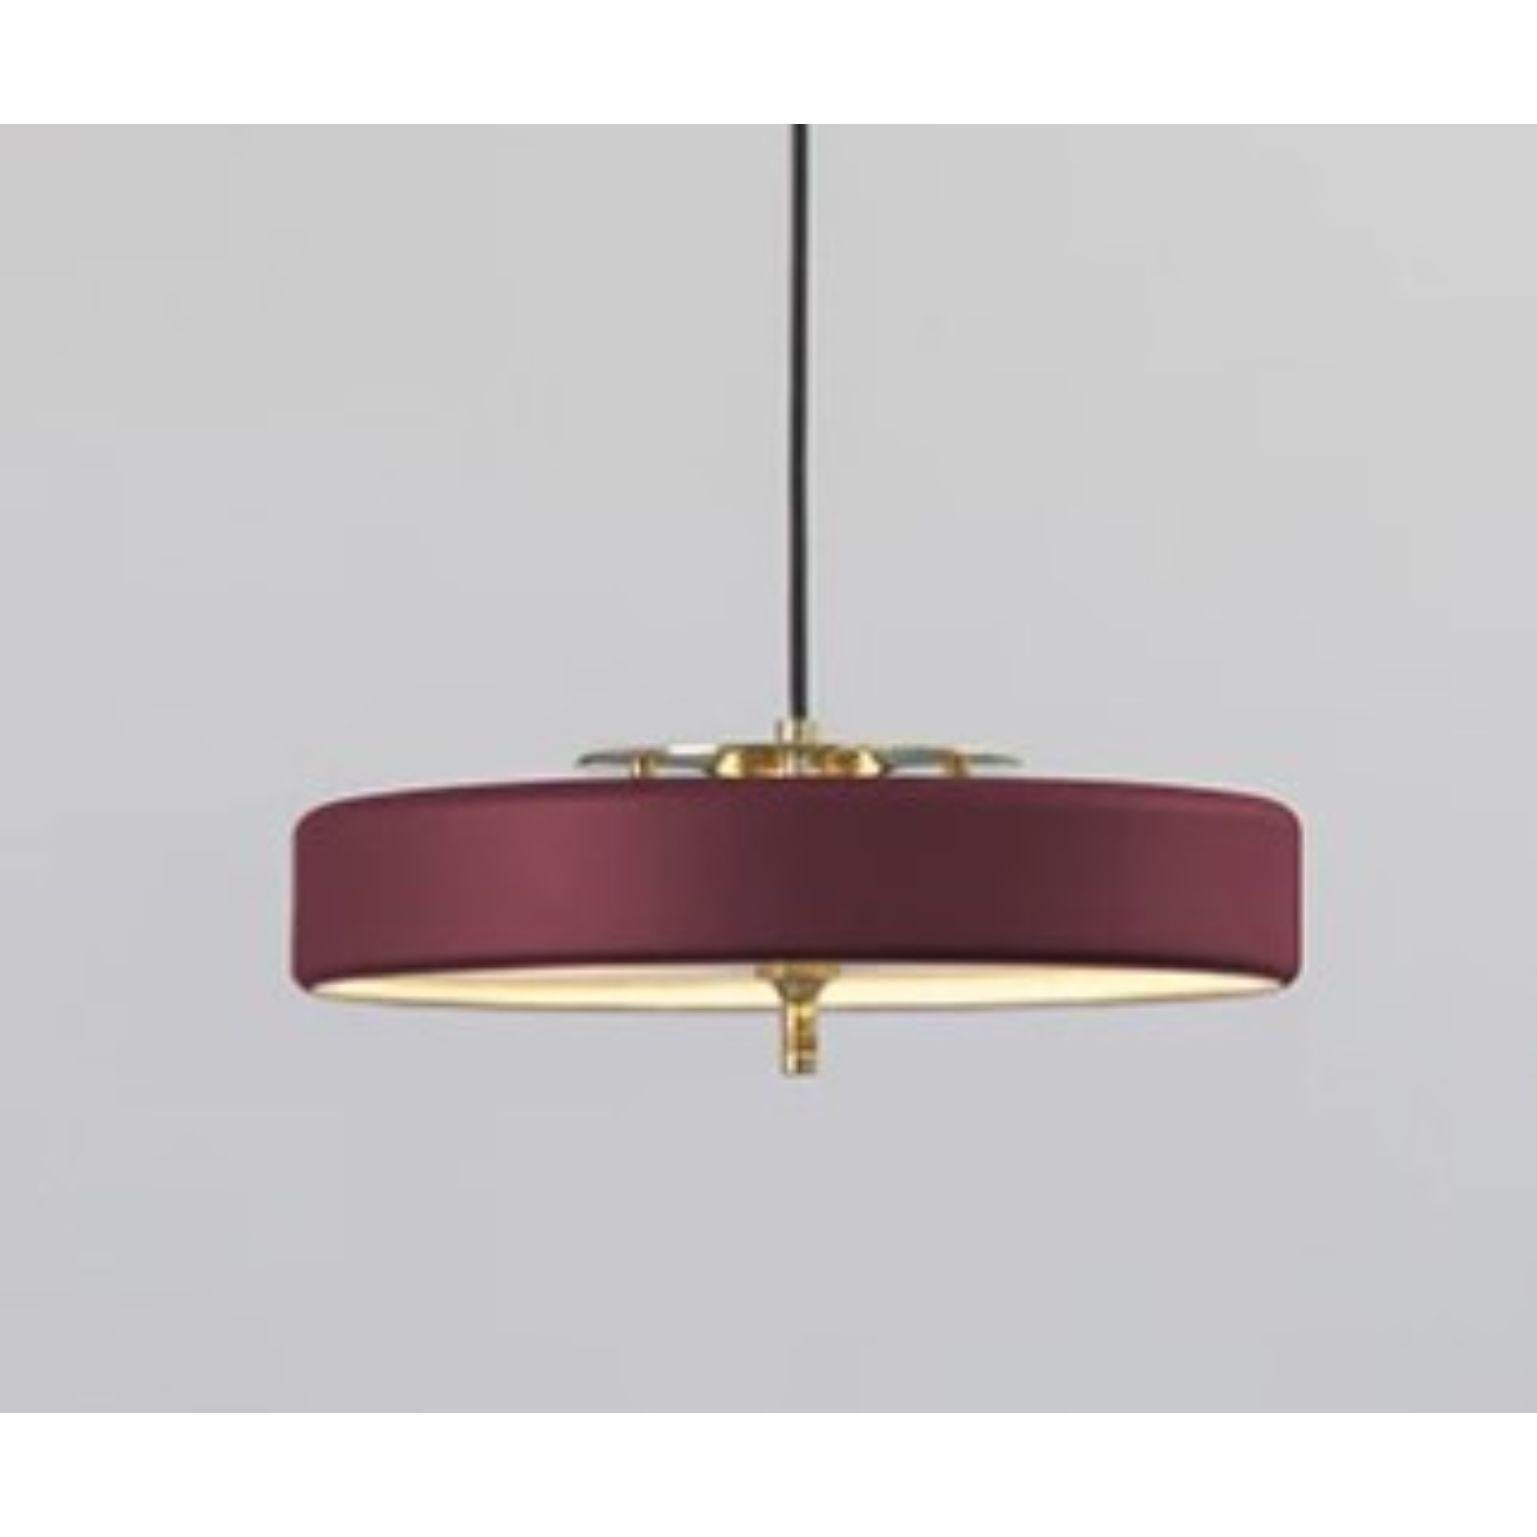 Contemporary Revolve Rise and Fall Pendant Light, Polished Brass, Oxblood by Bert Frank For Sale